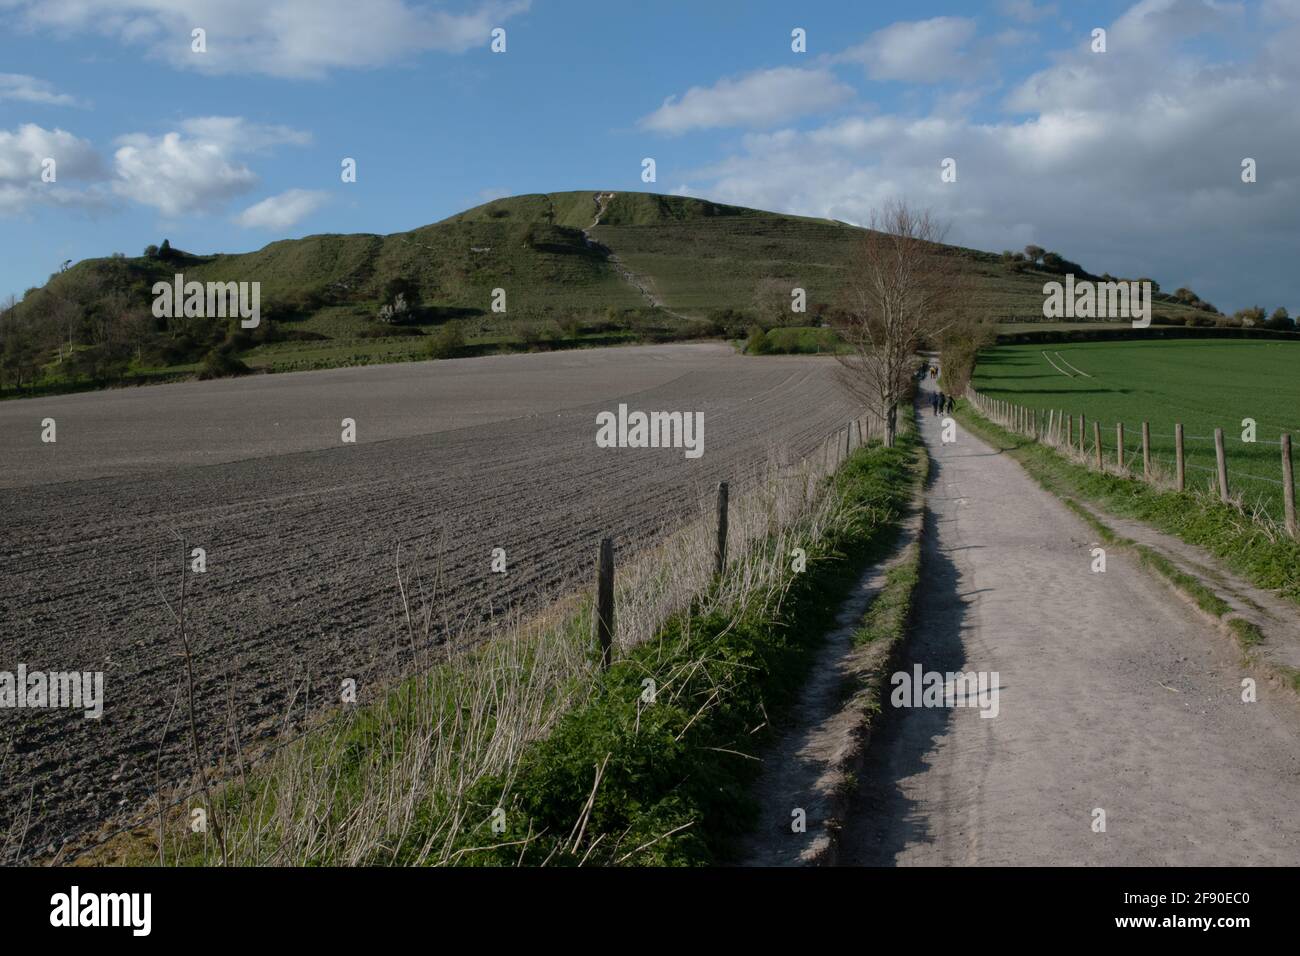 Cley Hill, Wiltshire, UK Stock Photo